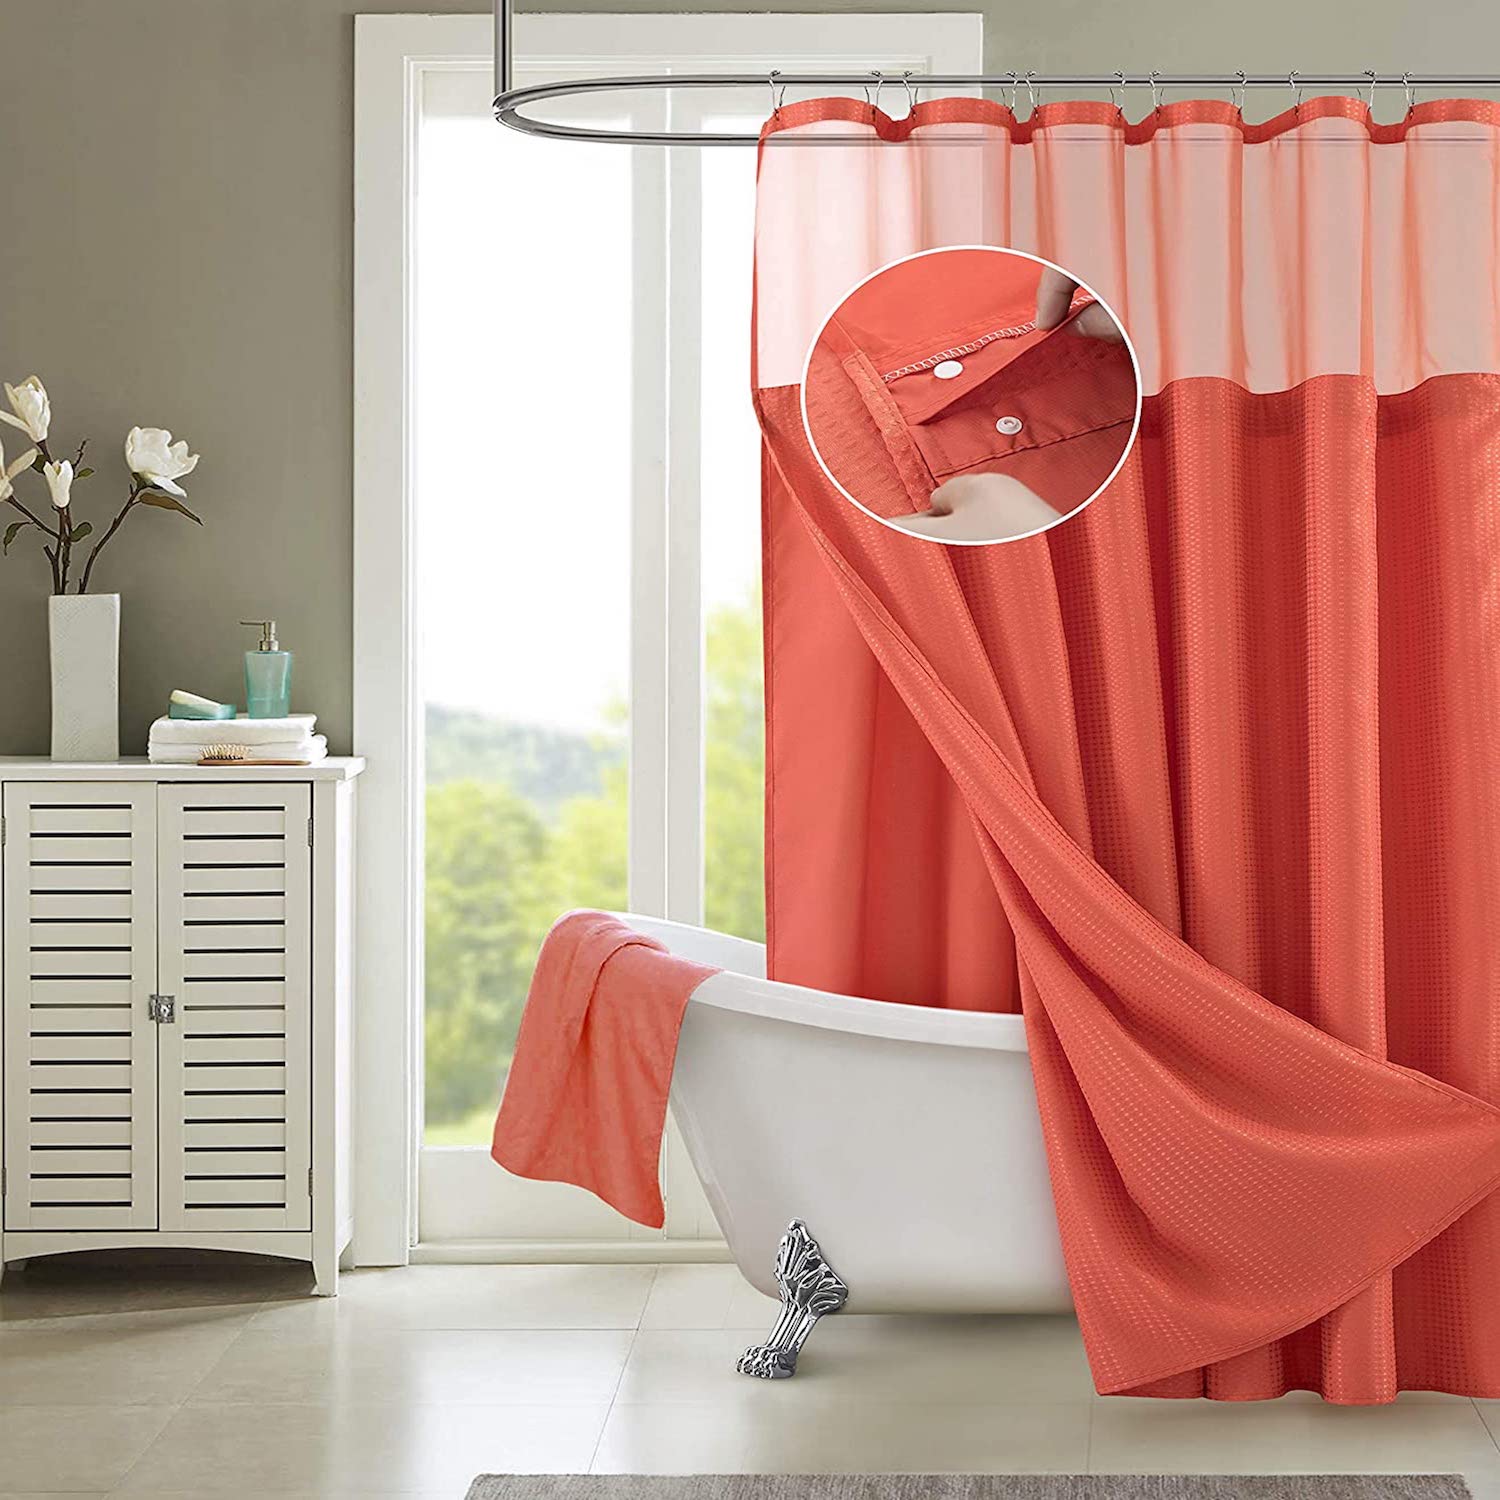 Dainty Home Complete 2 in 1 Waffle Weave Hotel Spa Style Fabric Shower Curtain Snap On/Off Waterproof Detachable Liner Set